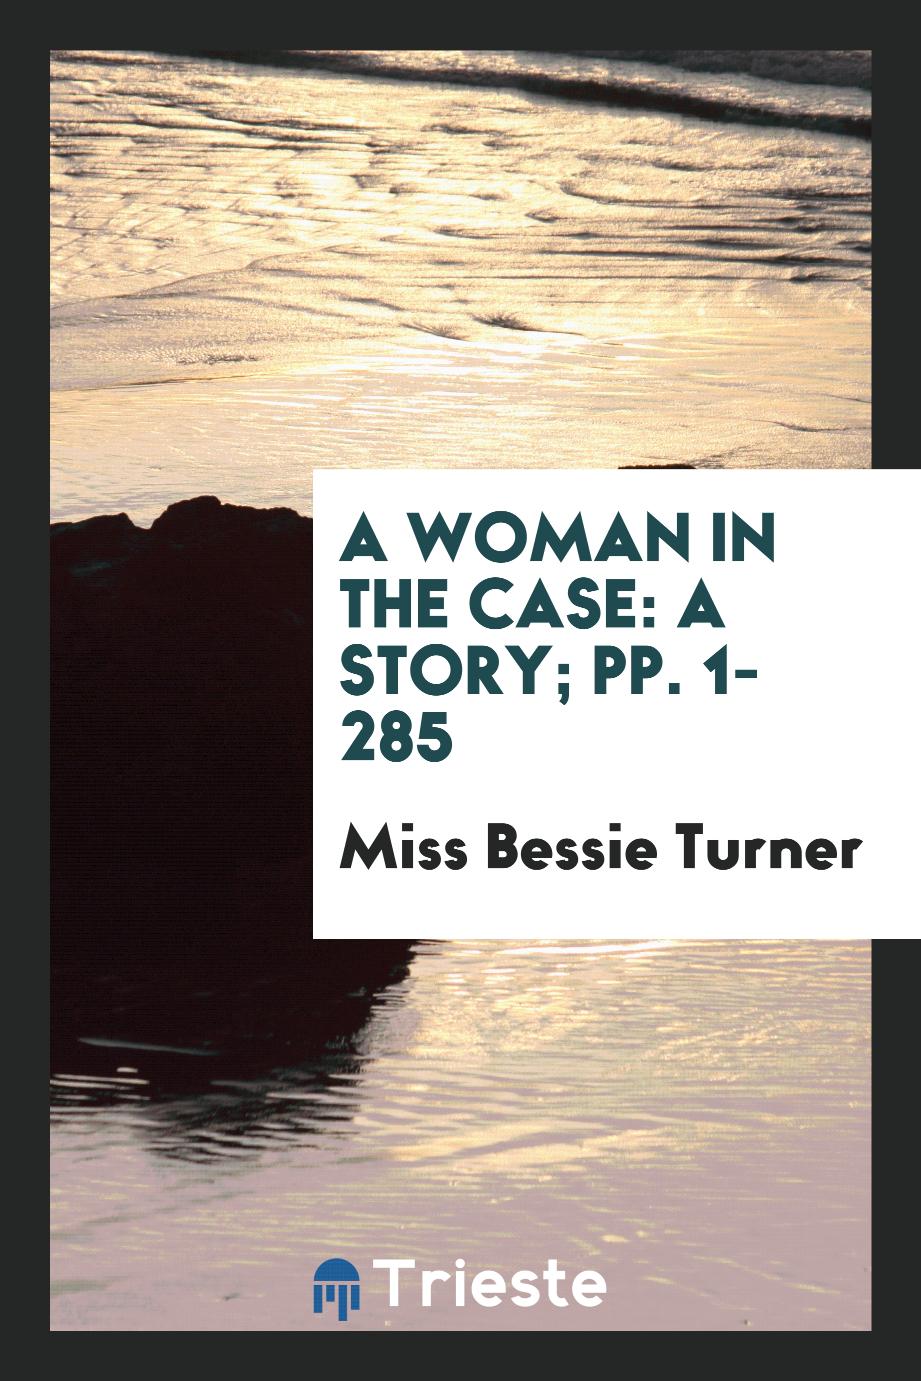 A Woman in the Case: A Story; pp. 1-285